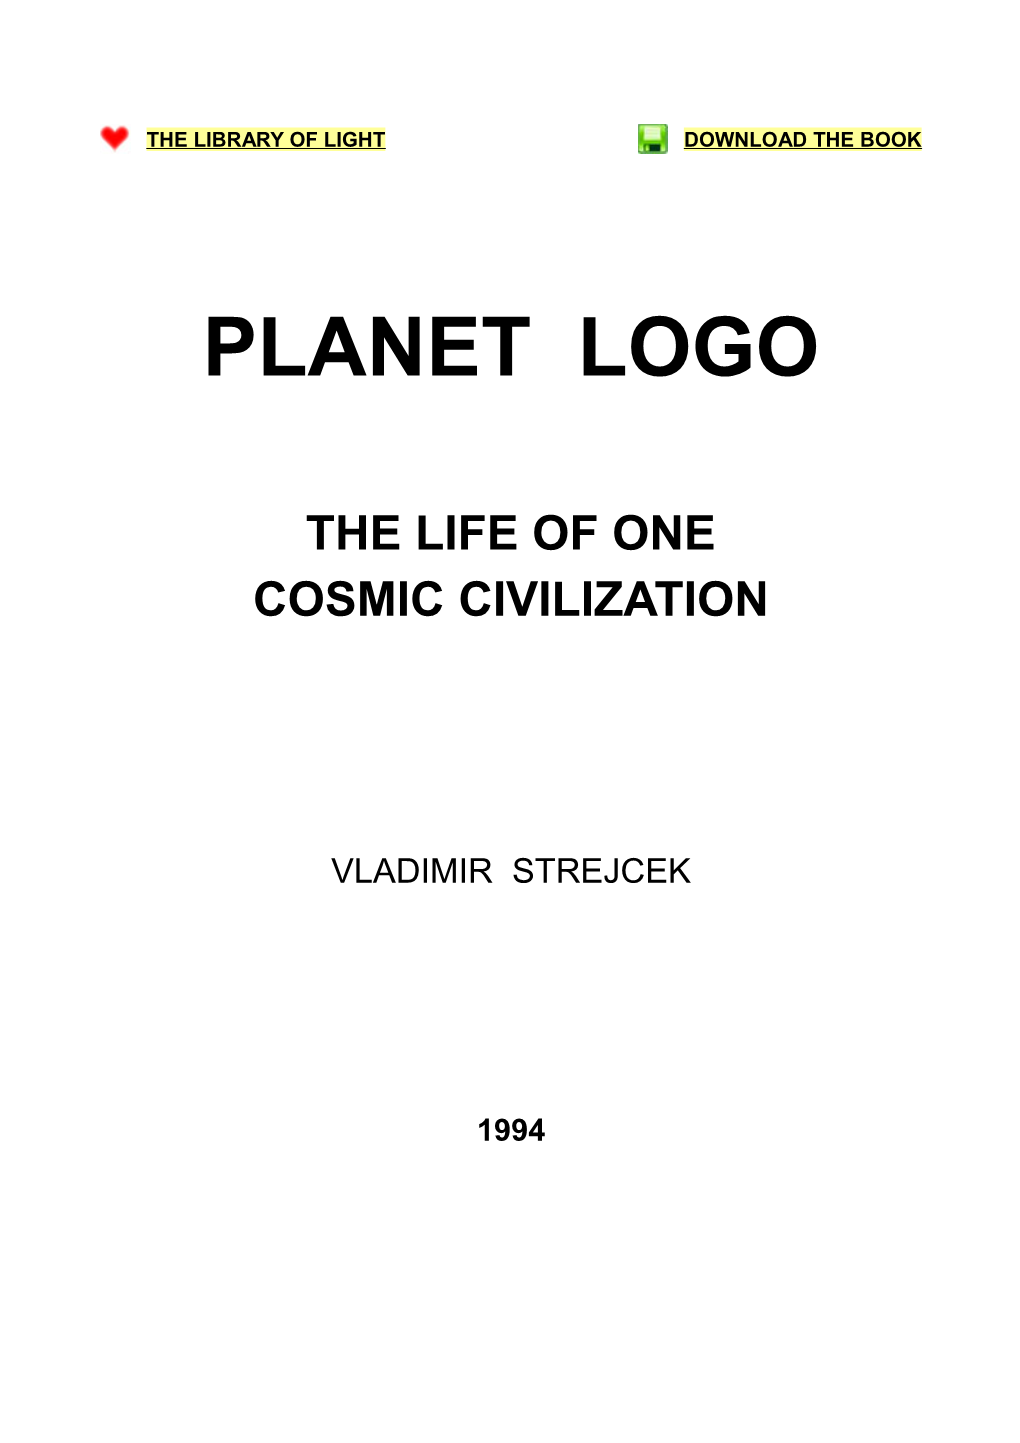 The Life of One Cosmiccivilization